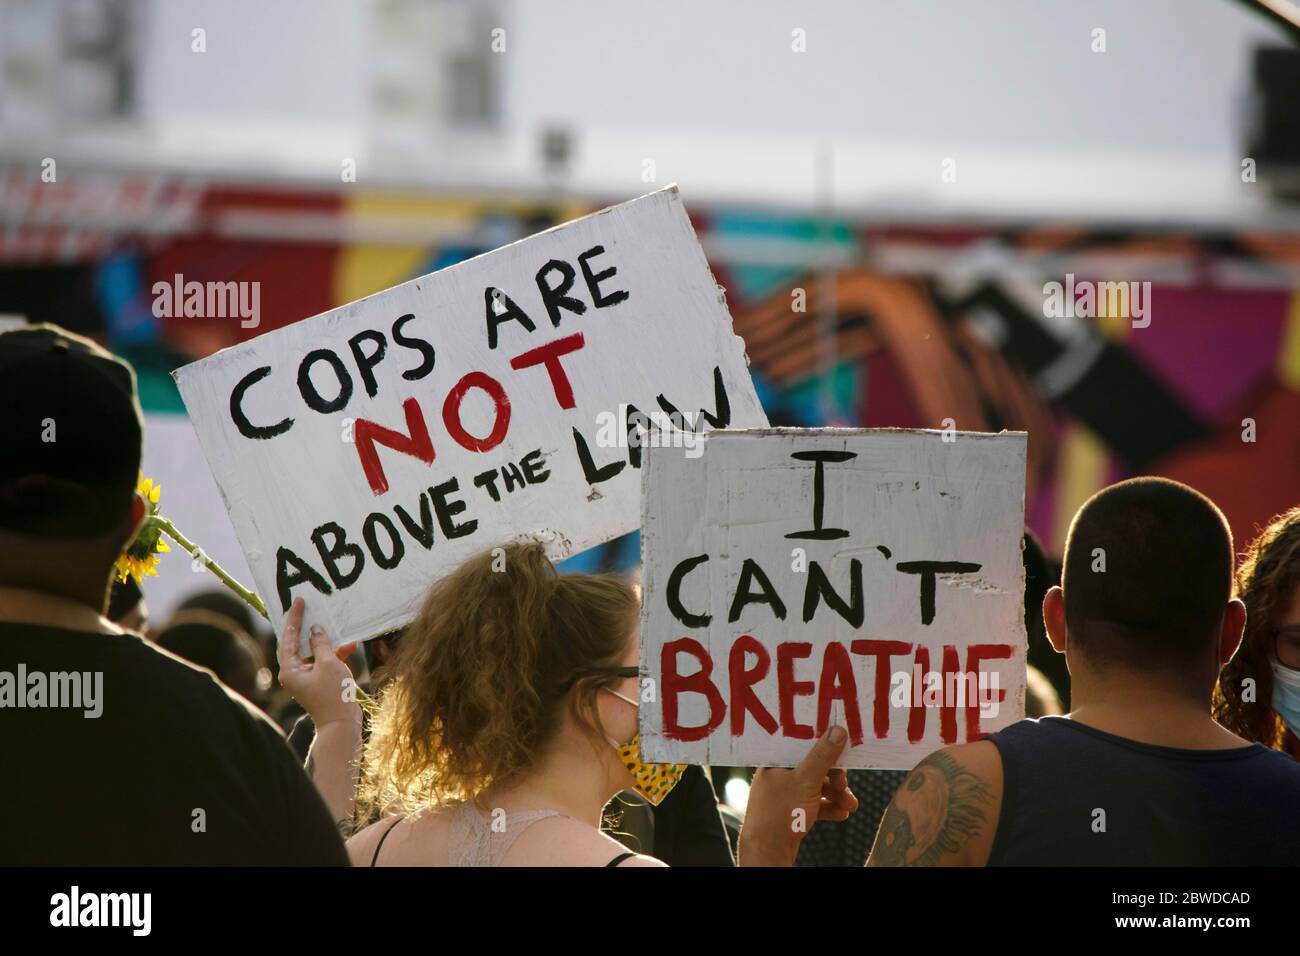 Las Vegas, NV - May 30, 2020: Protesters gather to protest and march in a nationwide call for changes in the police departments across the country on May 30, 2020 in downtown Las Vegas, Nevada. Credit: Shannon Beelman/The Photo Access Stock Photo